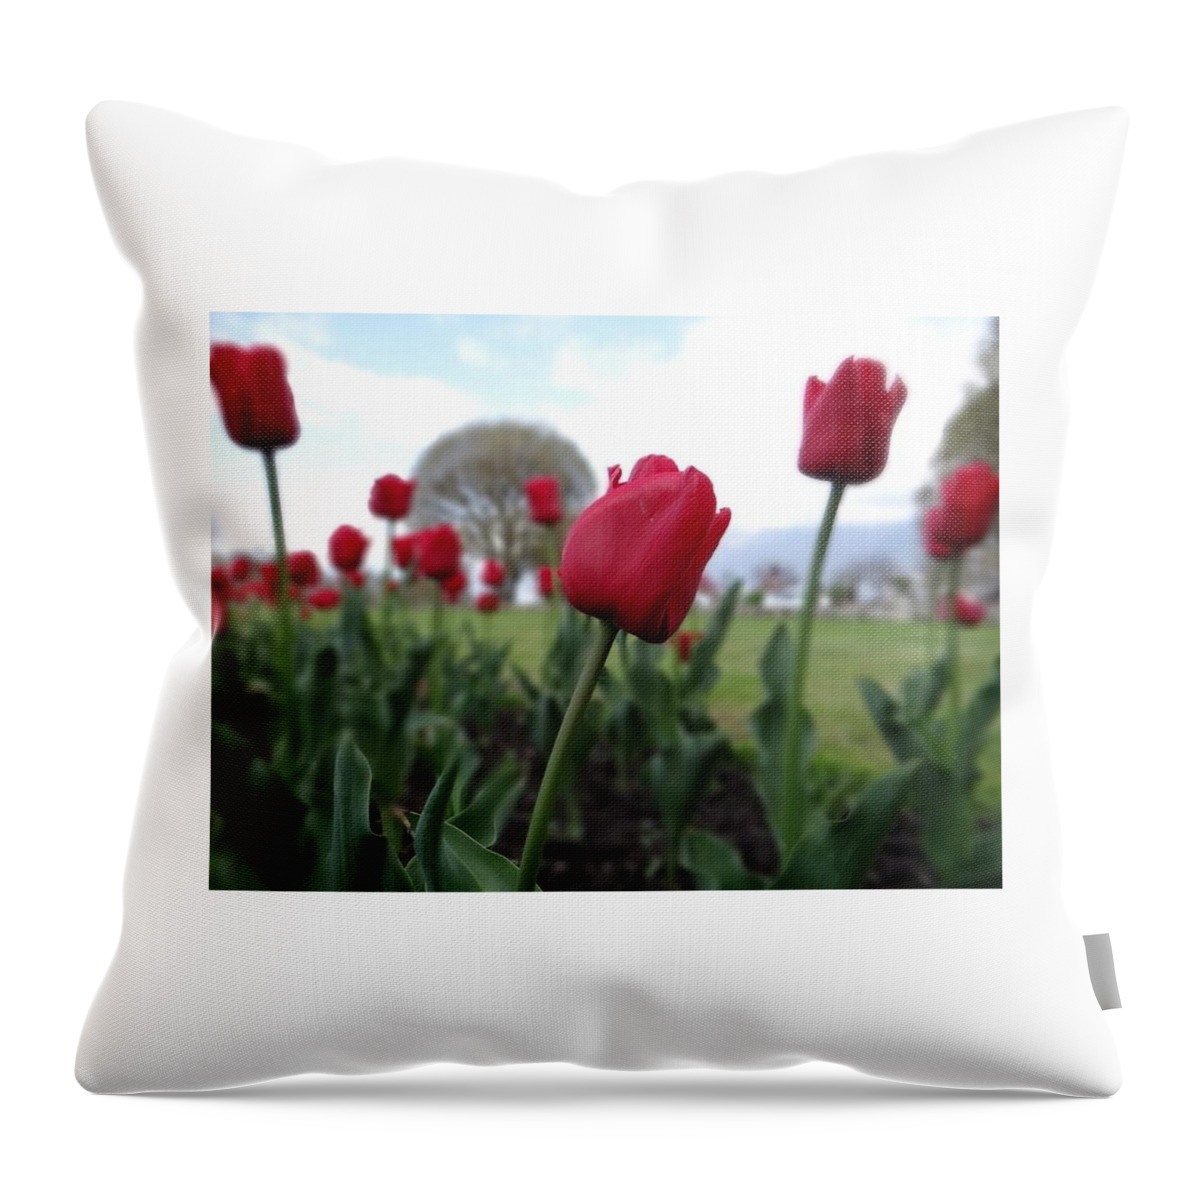 Landscape Throw Pillow featuring the photograph Garden by Khushboo N